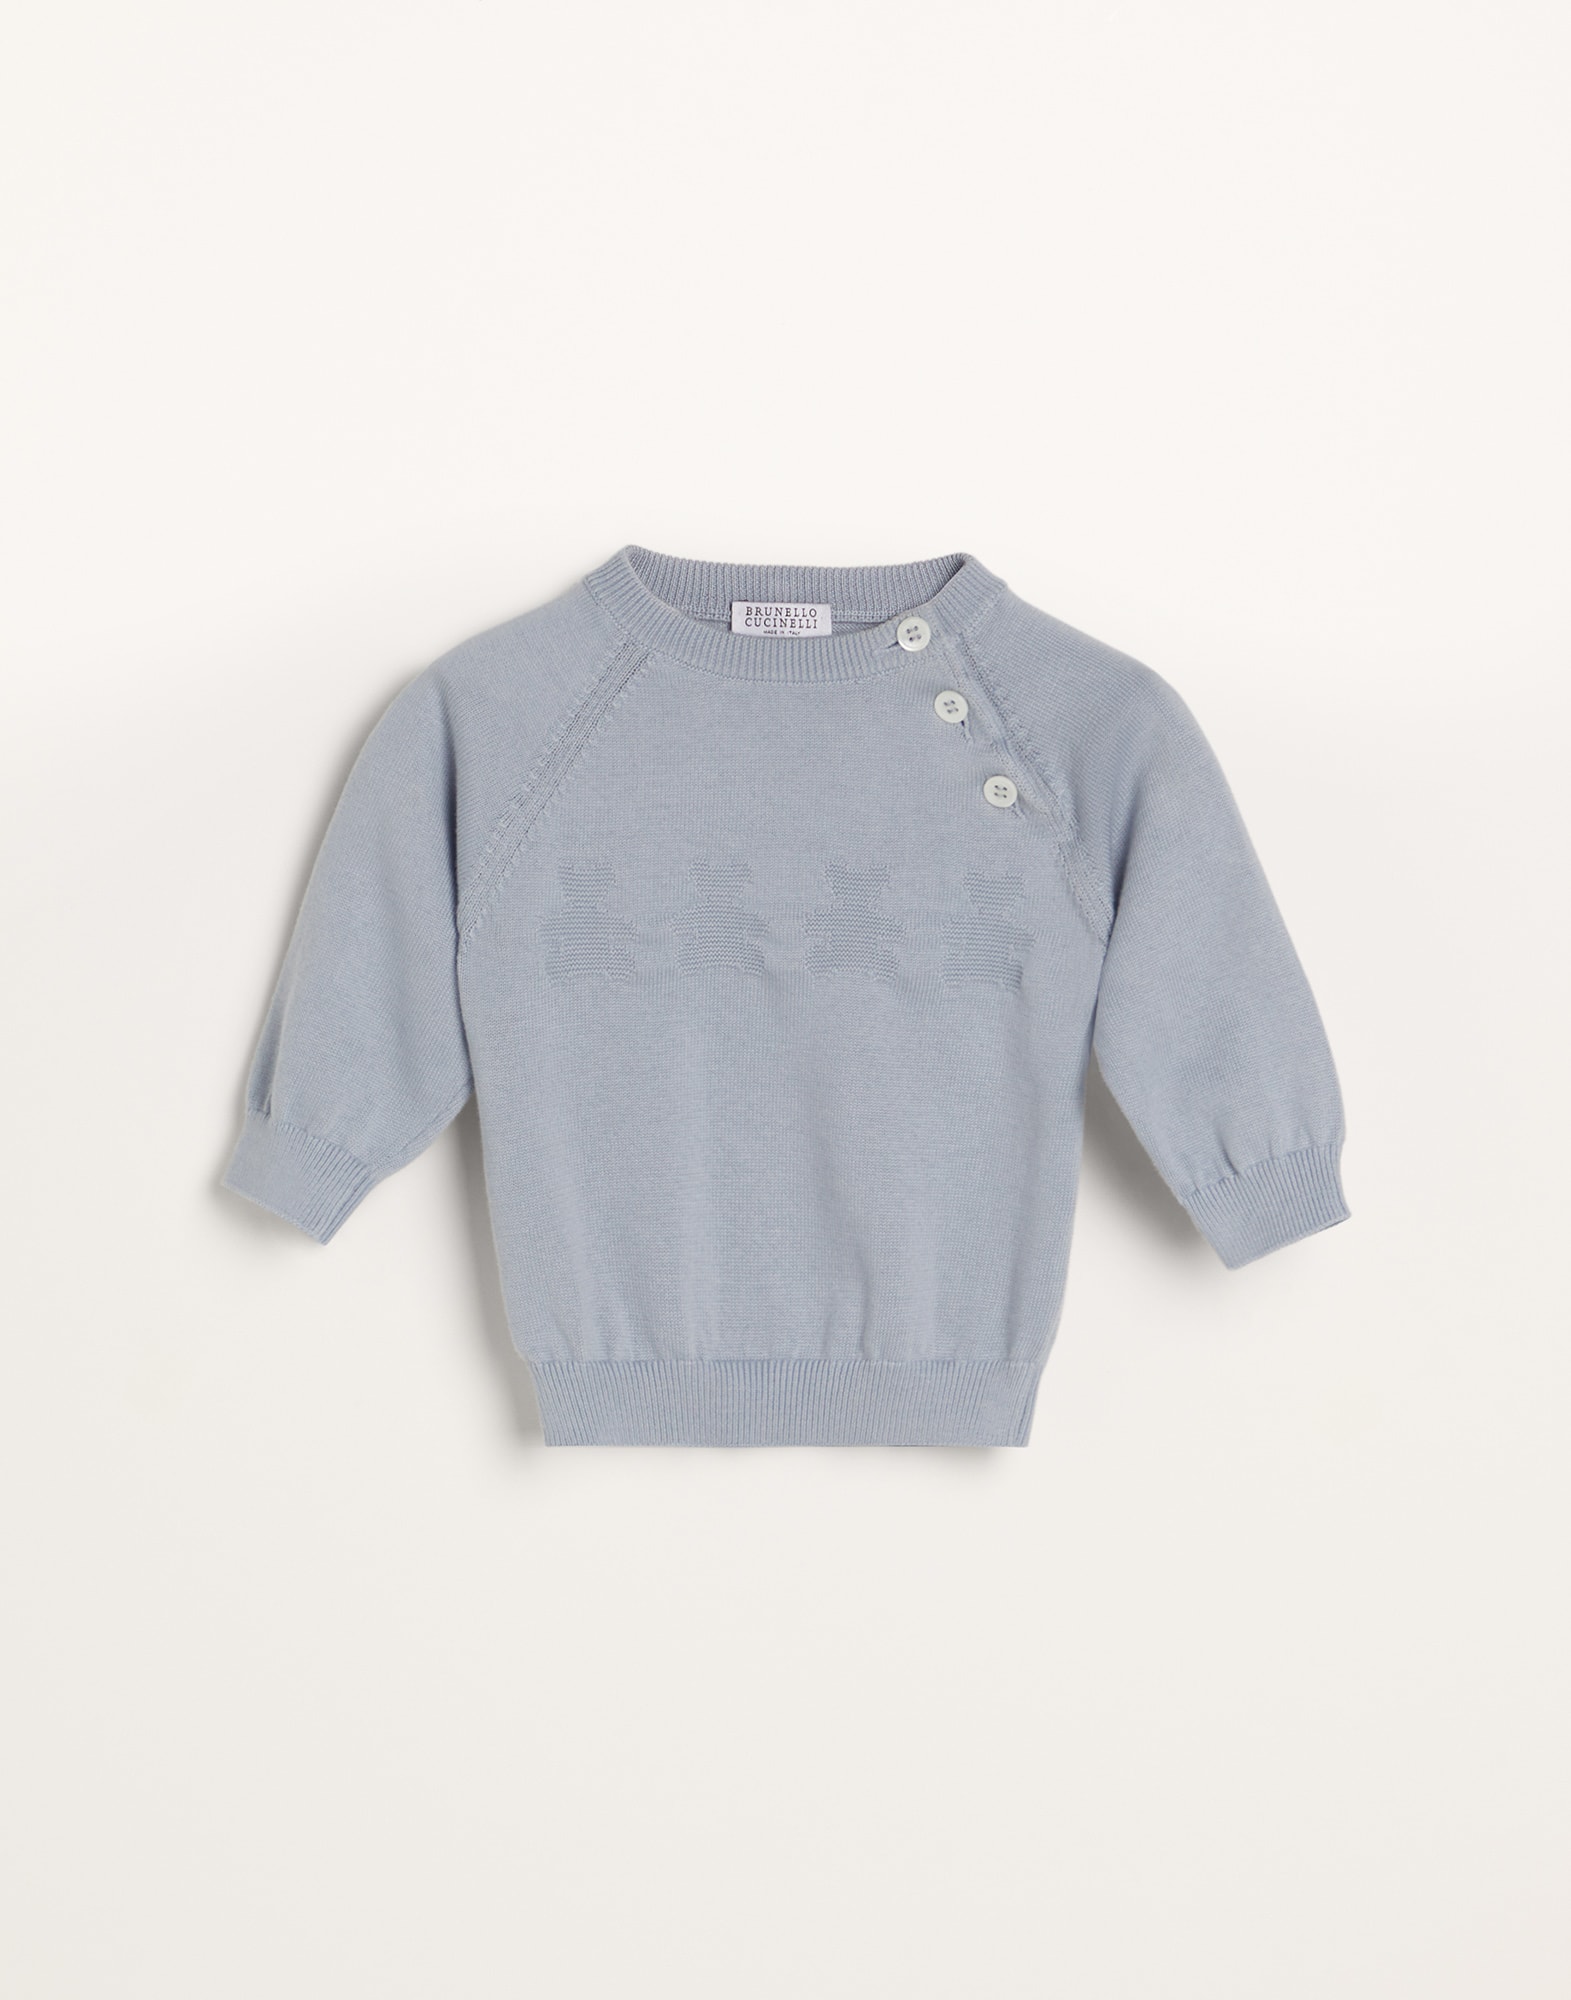 Cotton Baby sweater